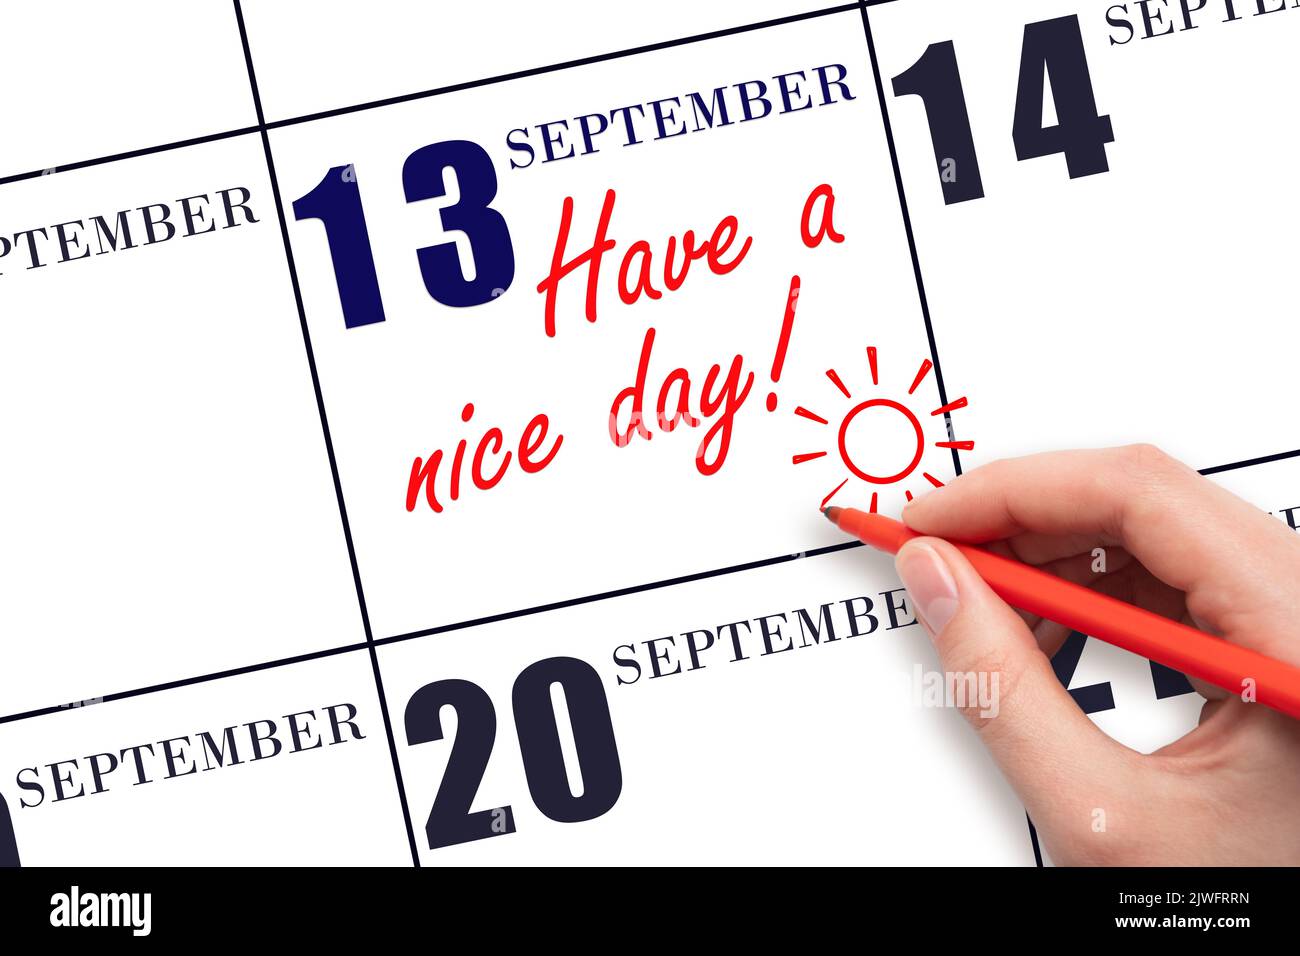 13th day of September. The hand writing the text Have a nice day and drawing the sun on the calendar date September  13. Save the date. Autumn month, Stock Photo